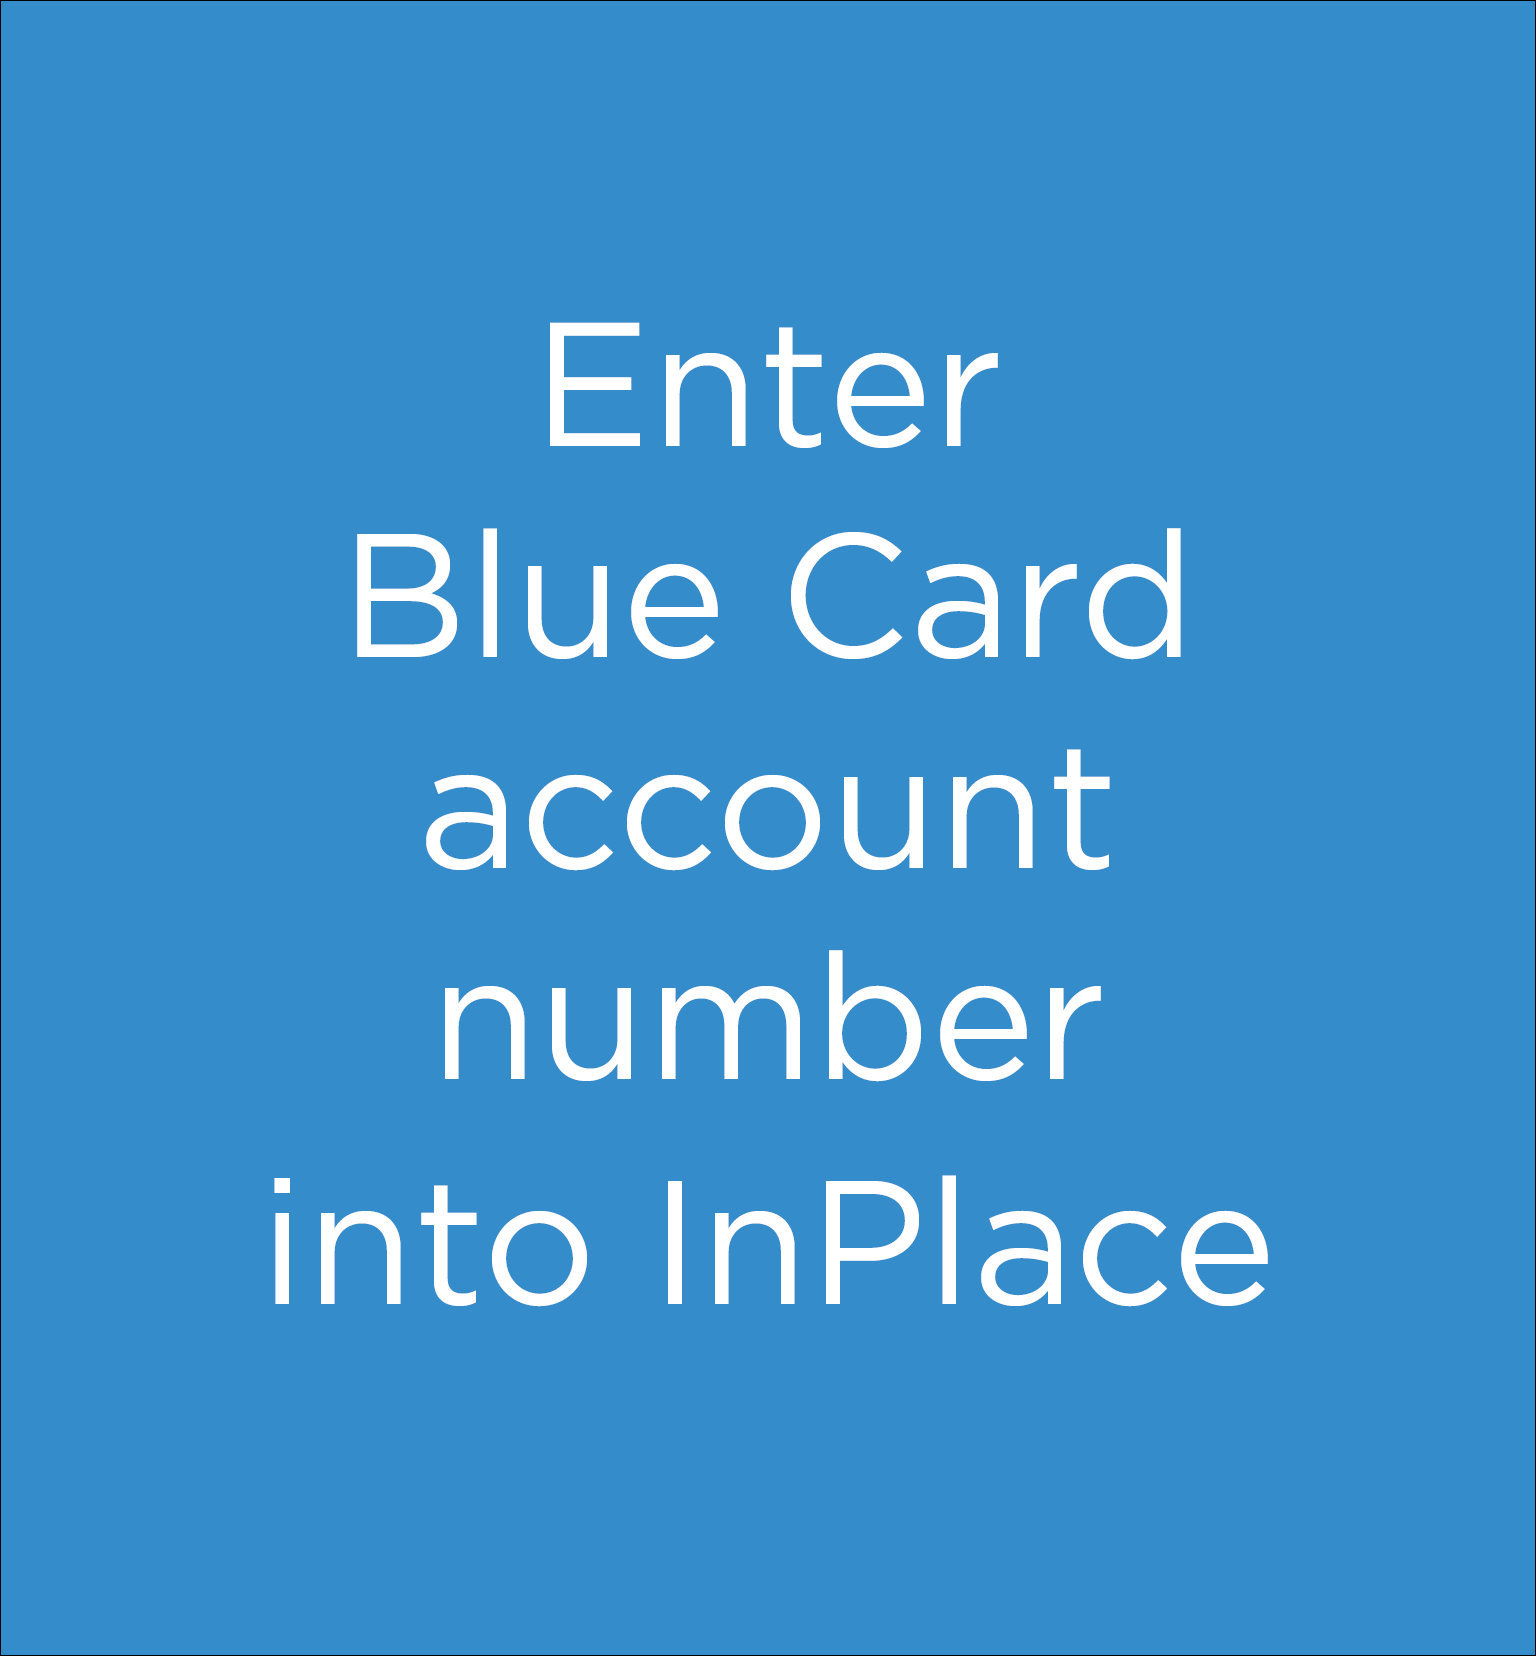 Enter Blue Card account number into InPlace